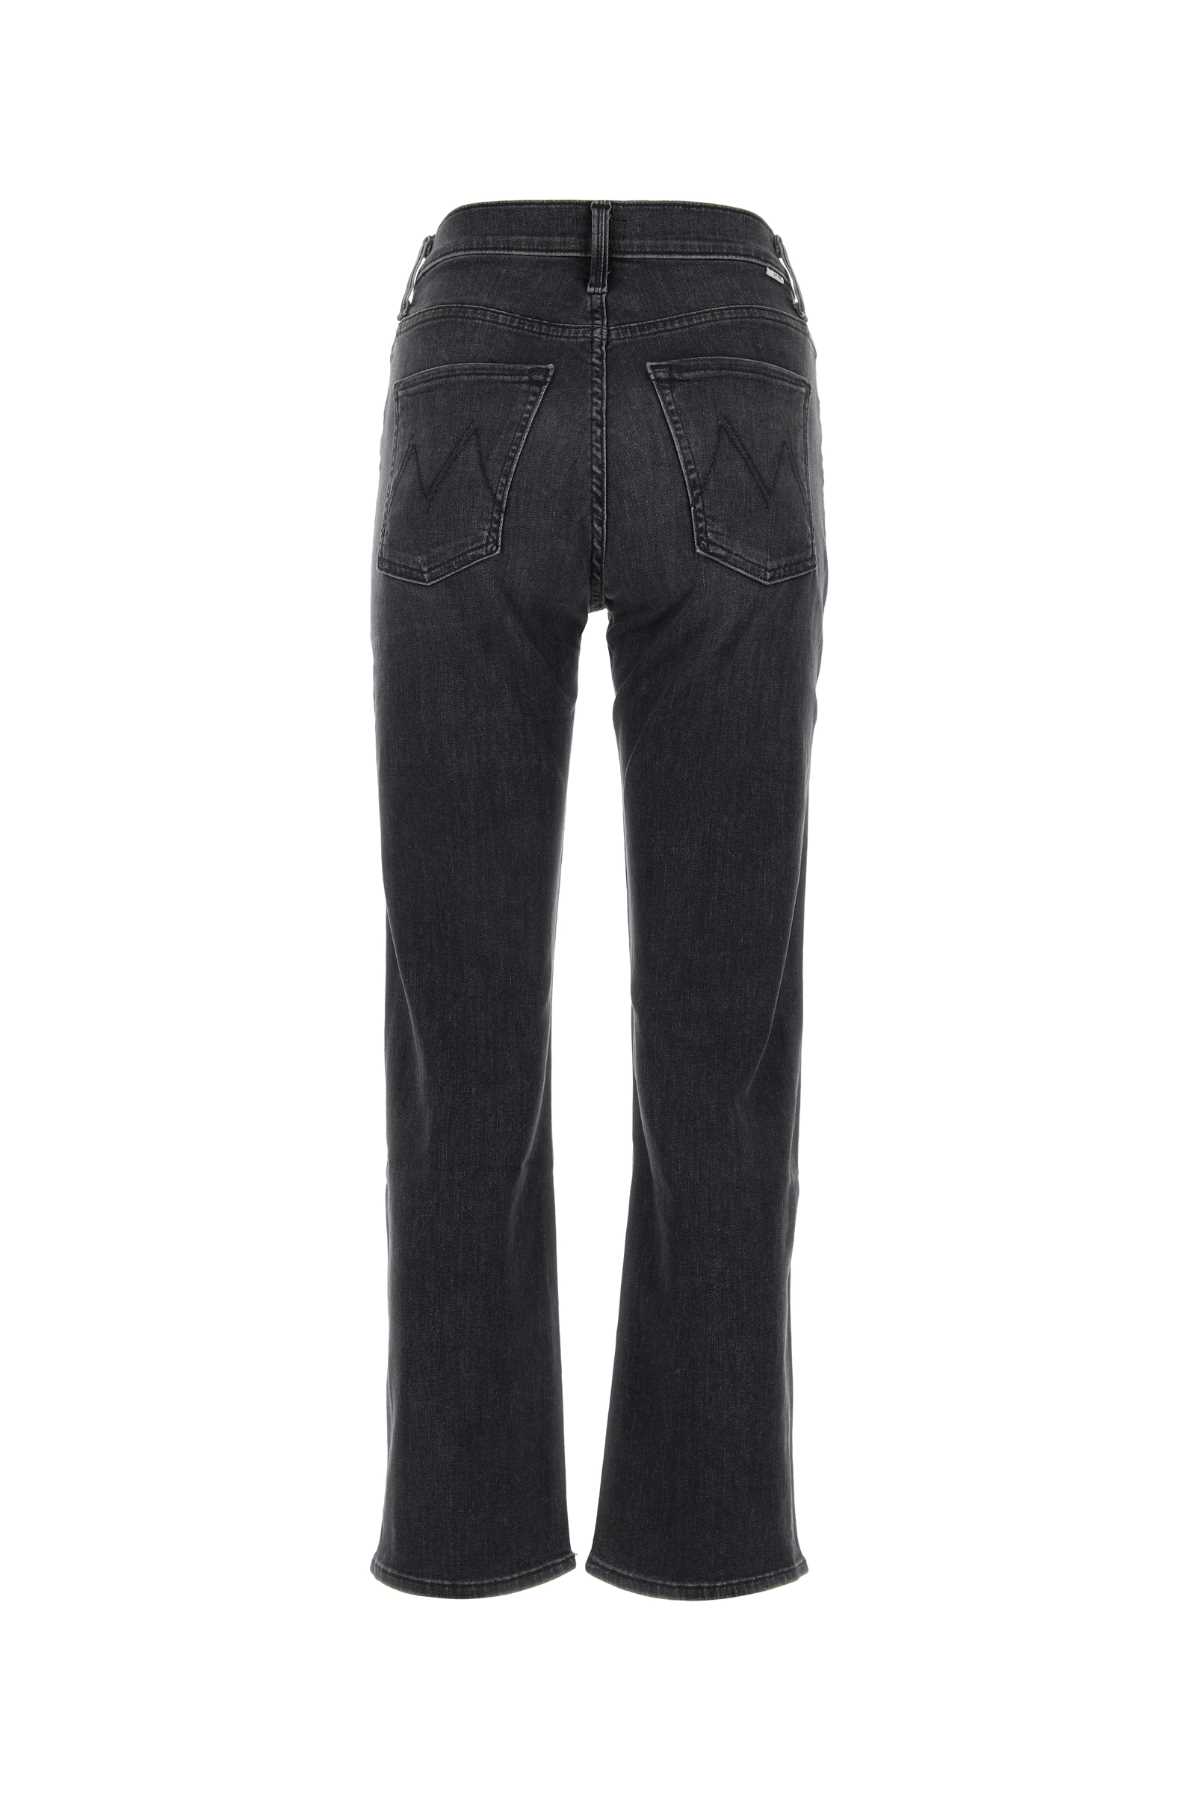 Mother Black Stretch Denim The Ditcher Zip Ankle Jeans